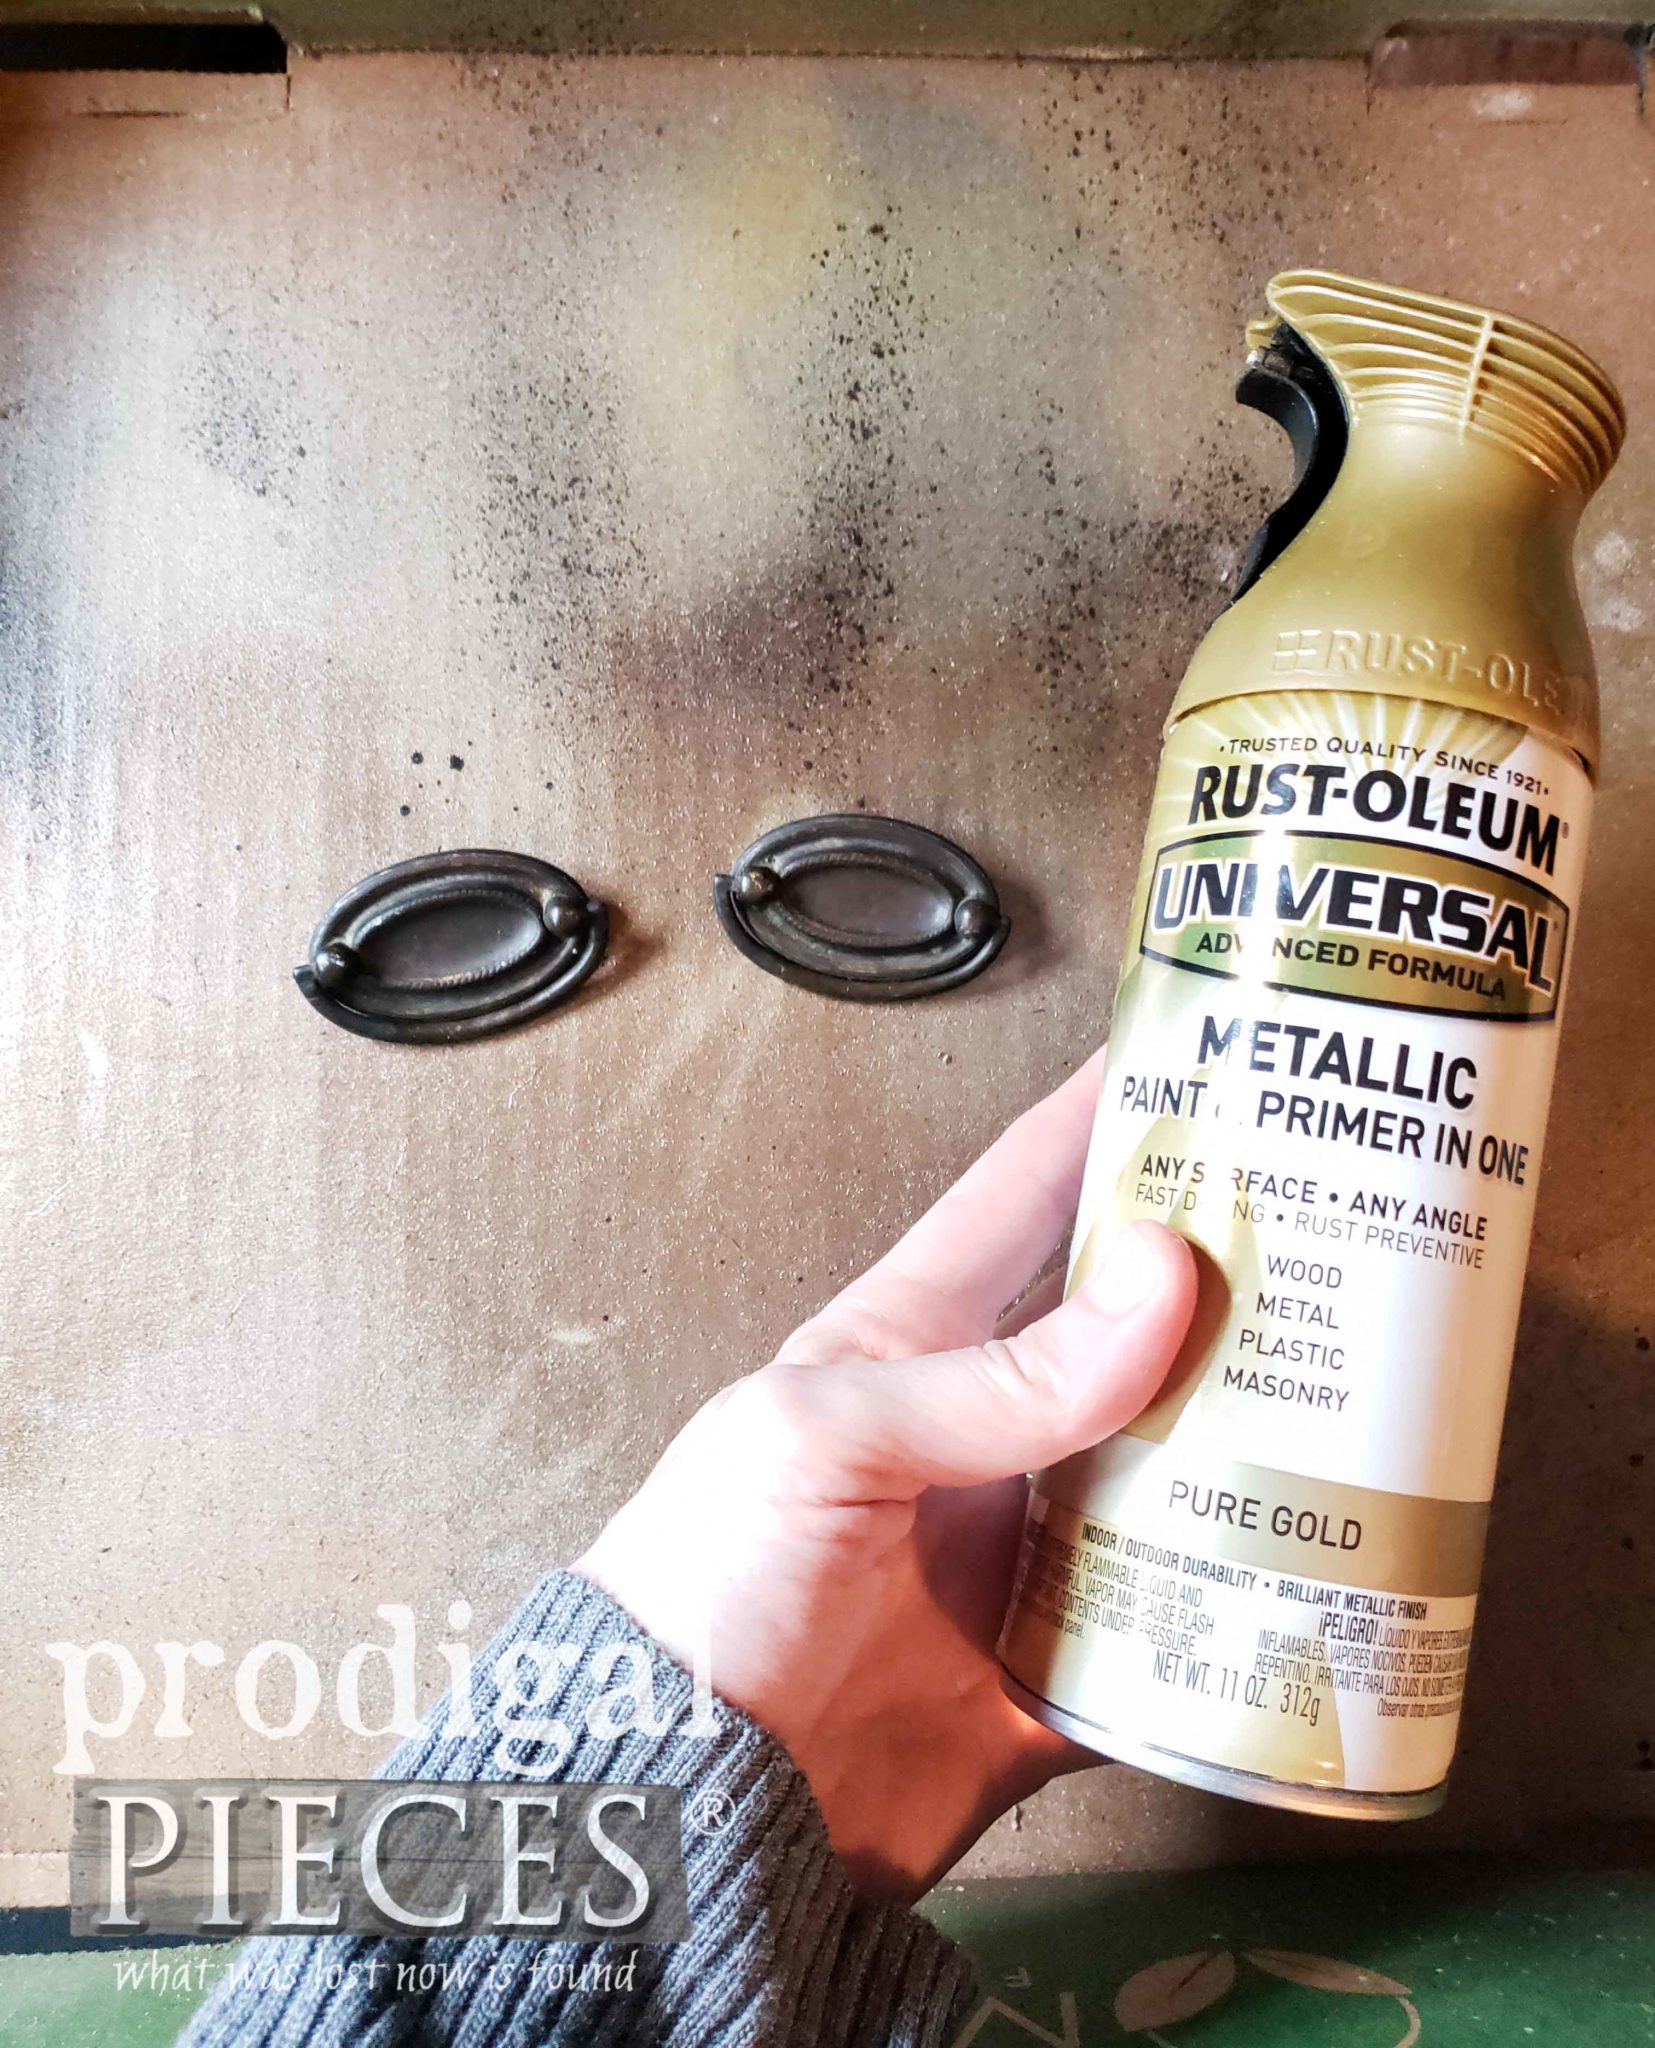 Spray Painting Hardware with Pure Gold Spray Paint | prodigalpieces.com